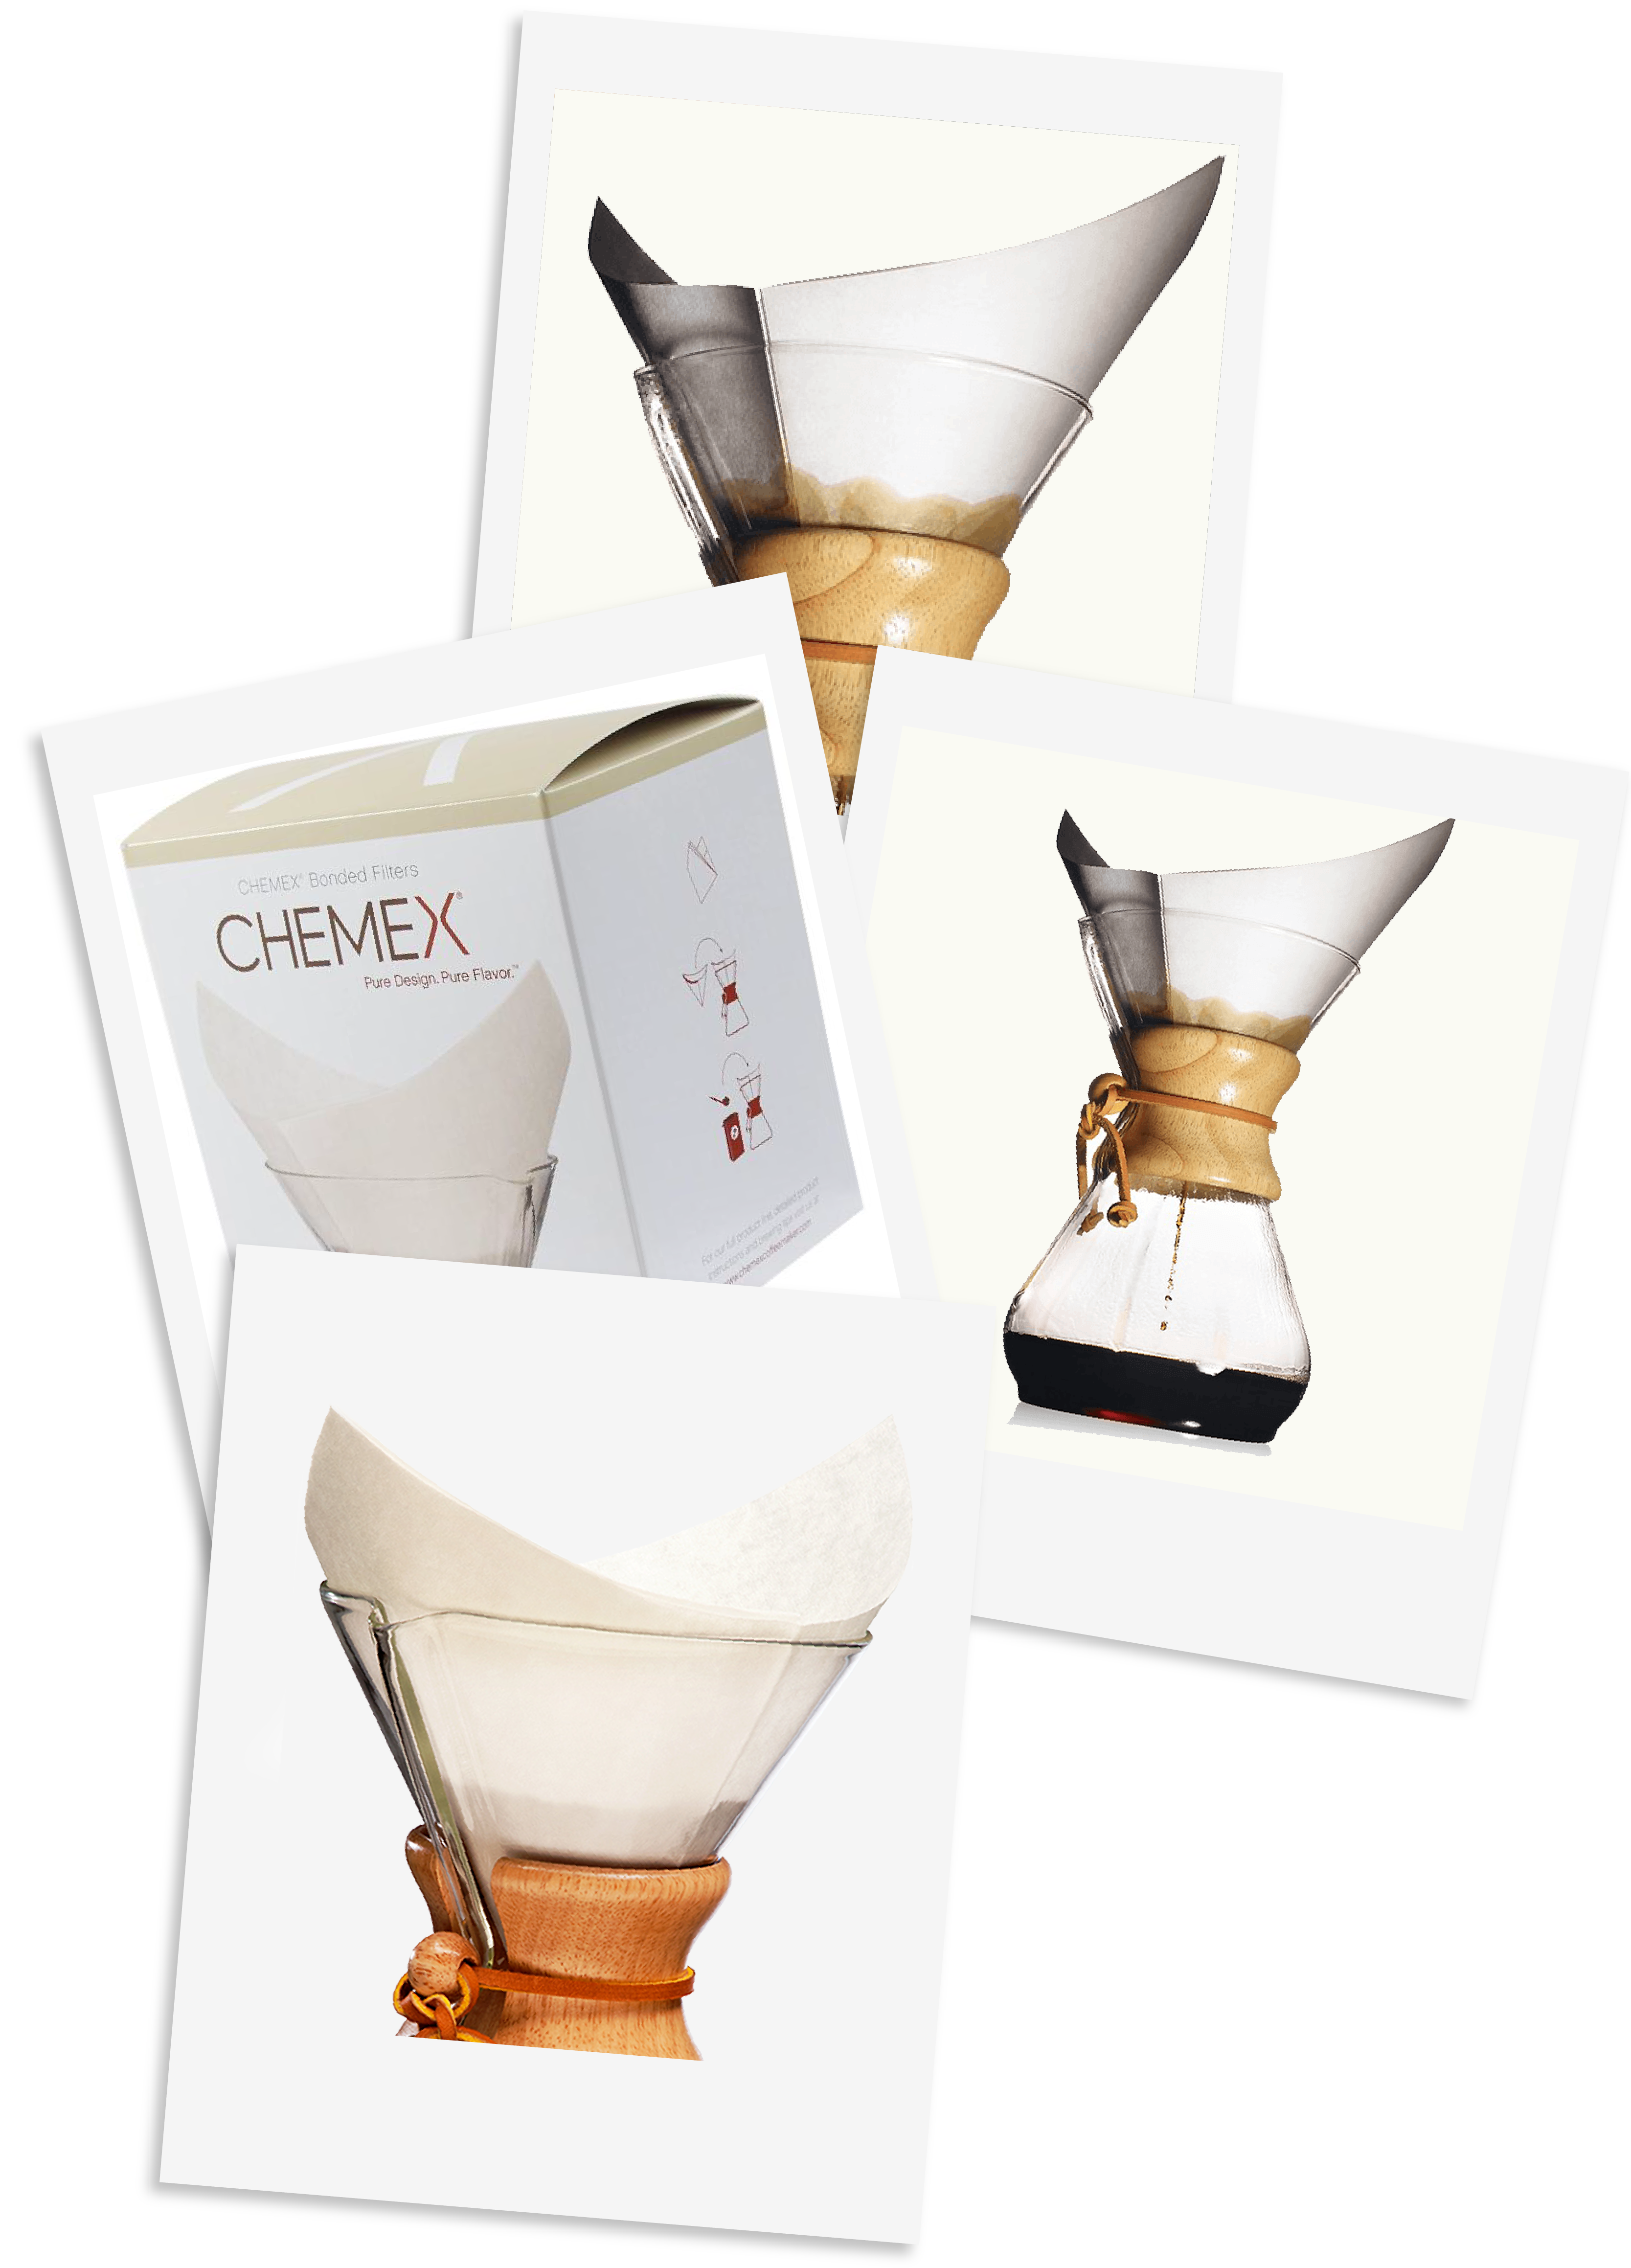 CHEMEX® Filters 100 Filter Pack and Chemex pour over